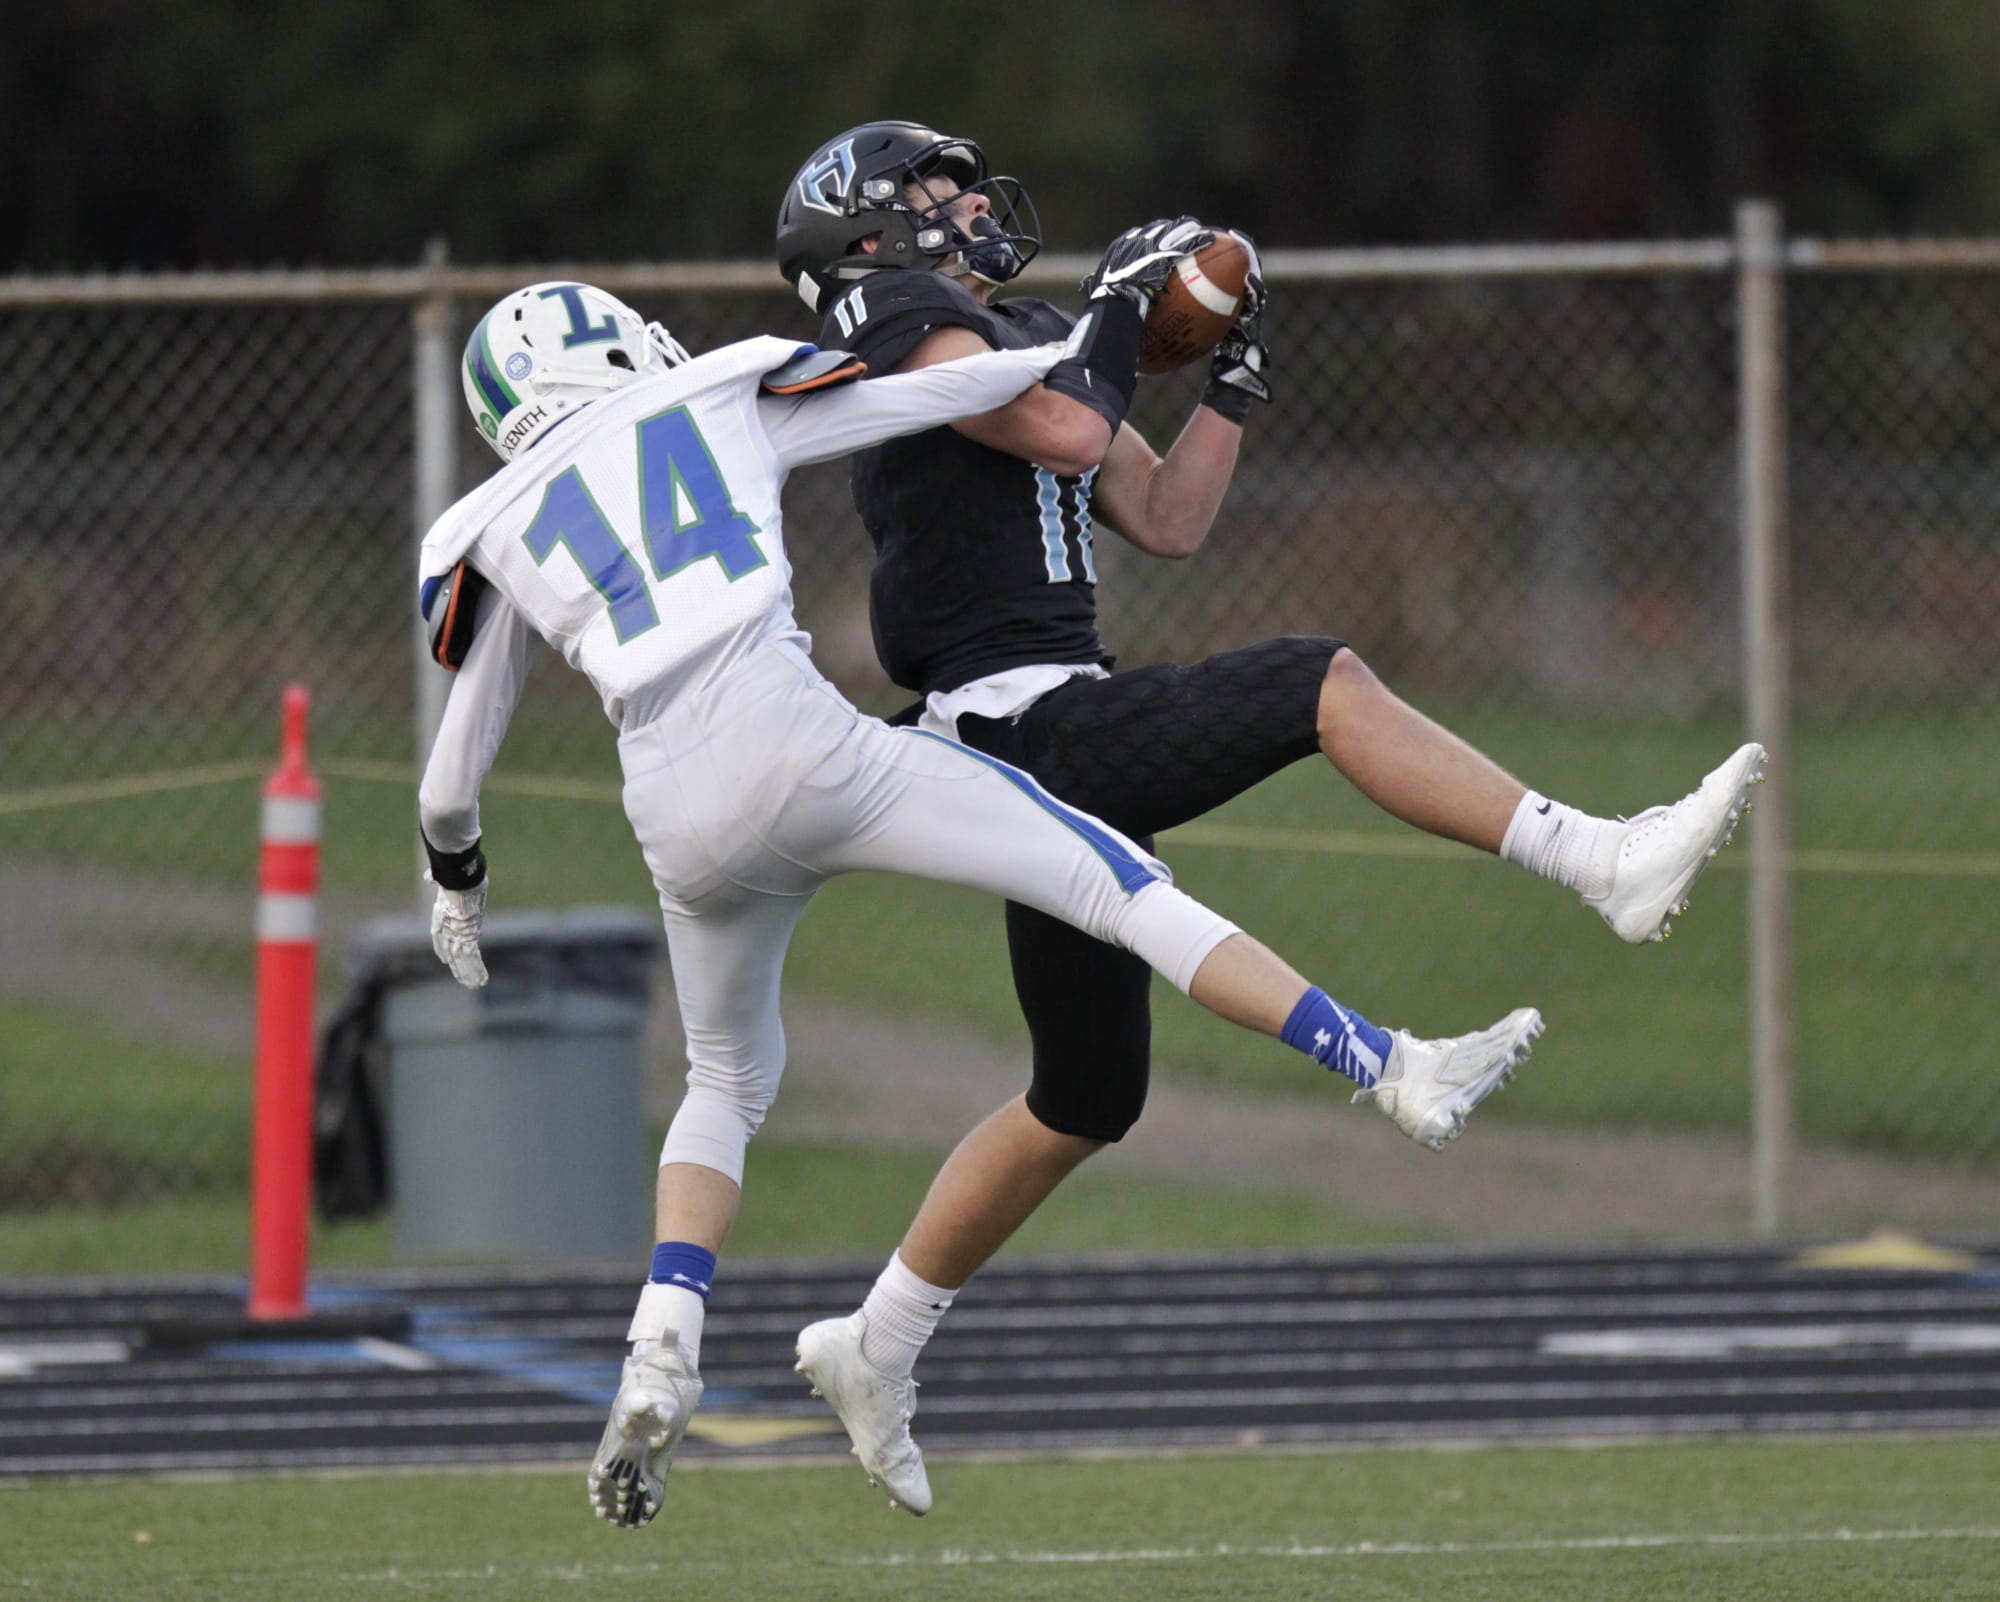 Hockinson wide receiver Sawyer Racanelli, right, pulls in a touchdown pass as Liberty defensive back Caleb Carr defends in the 2A state football quarterfinals.